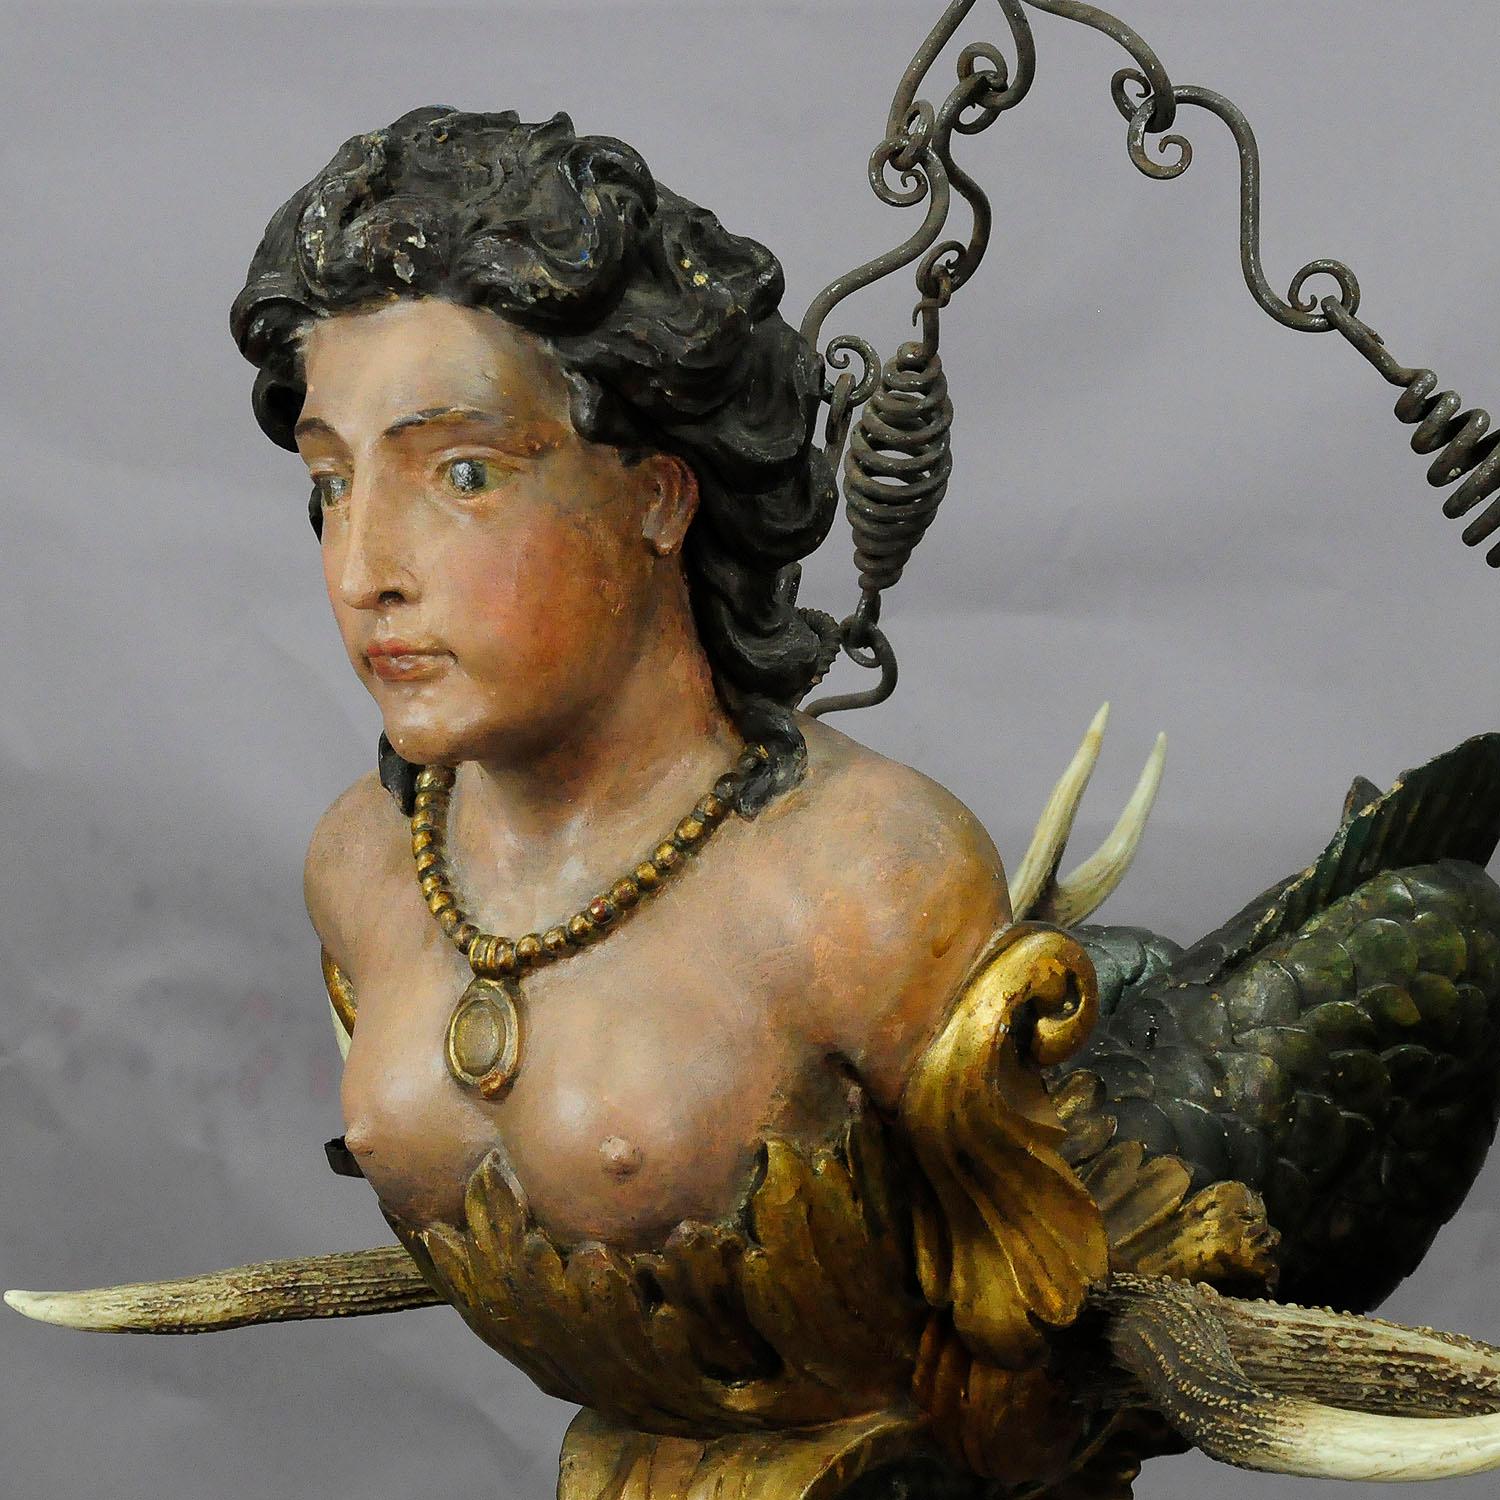 A wonderful antique 18th century lüsterweibchen. An elaborate carved and large mermaid statue attached to an impressive pair of stag antlers. Four hand forged iron spouts for candles and a hand forged suspension complete this fantastic piece. An